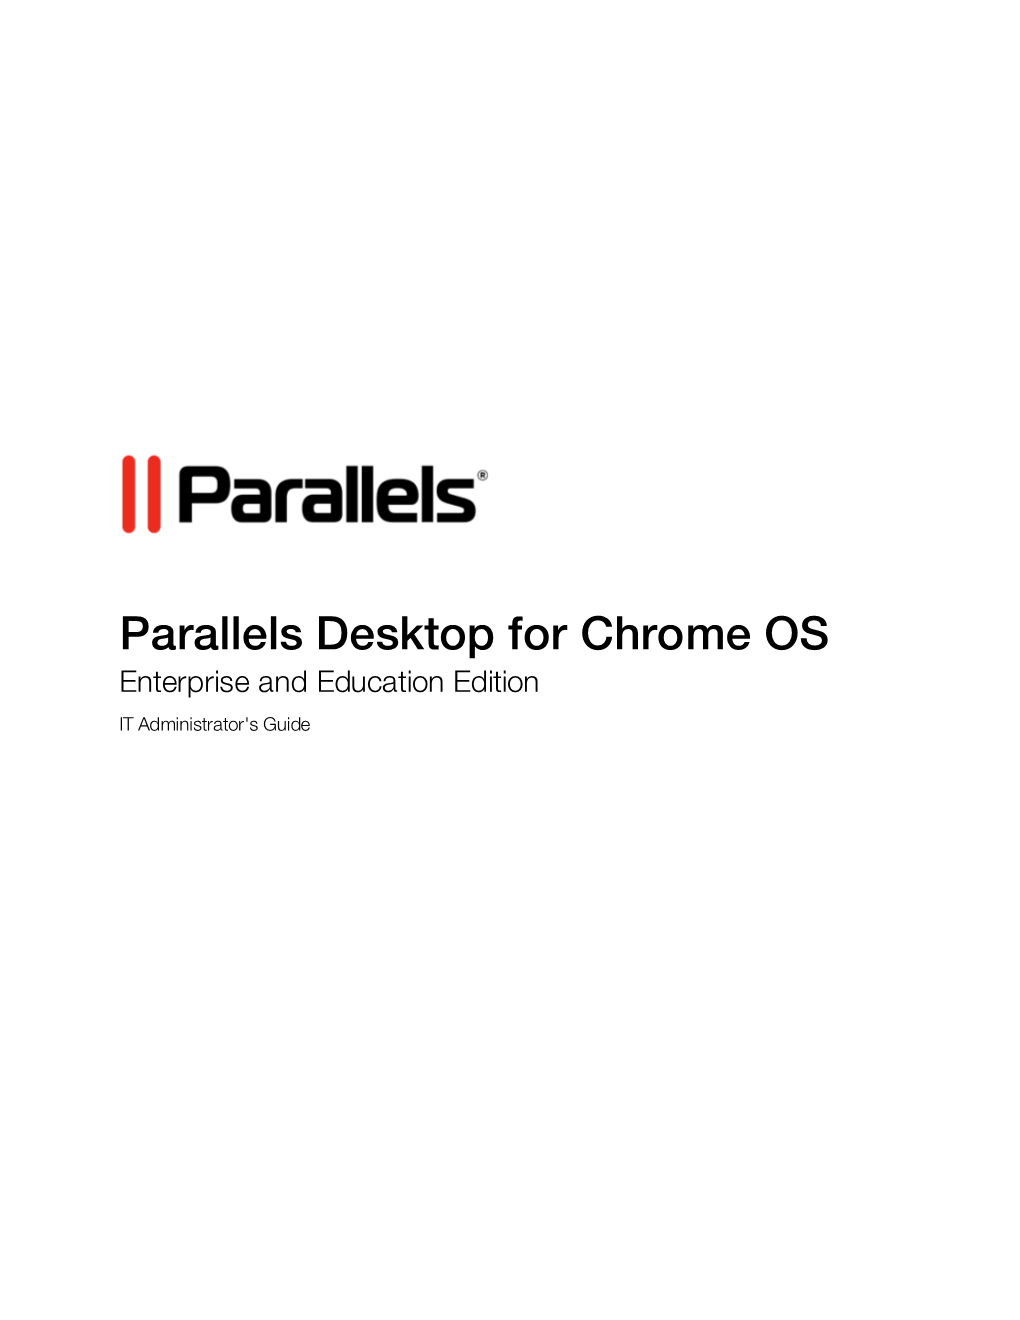 Parallels Desktop for Chrome OS Enterprise and Education Edition IT Administrator's Guide